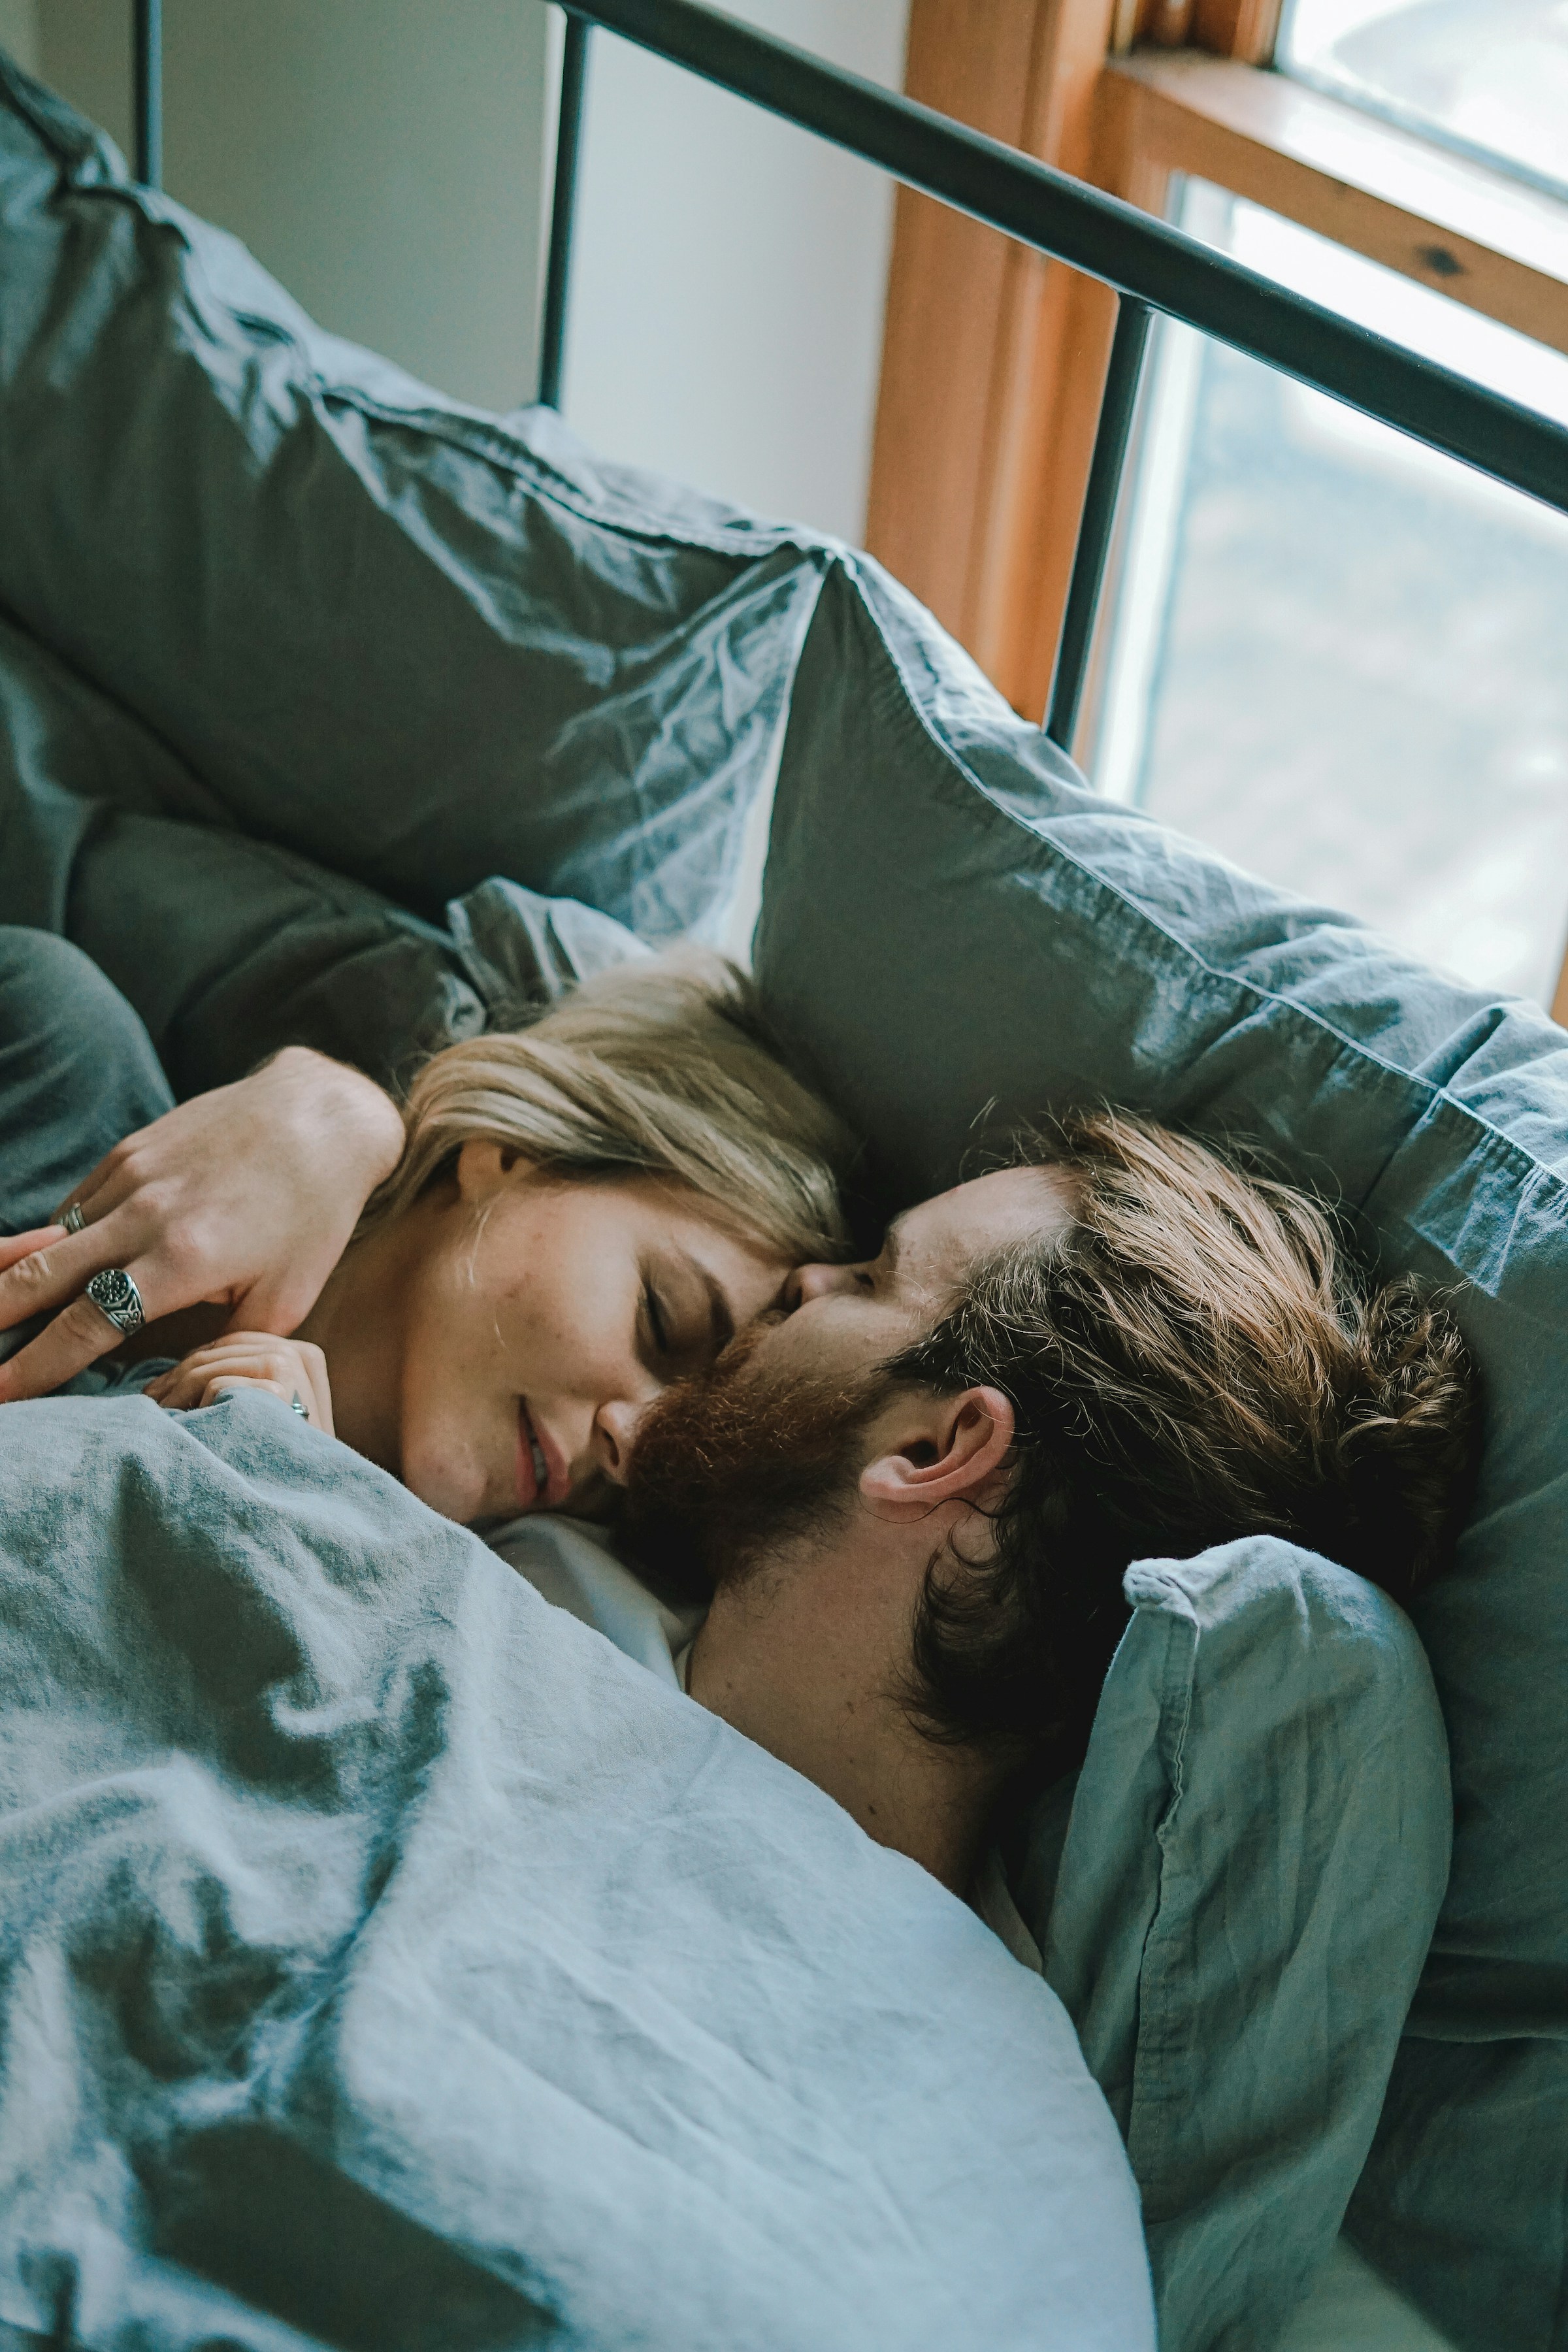 A couple laying in bed | Source: Unsplash